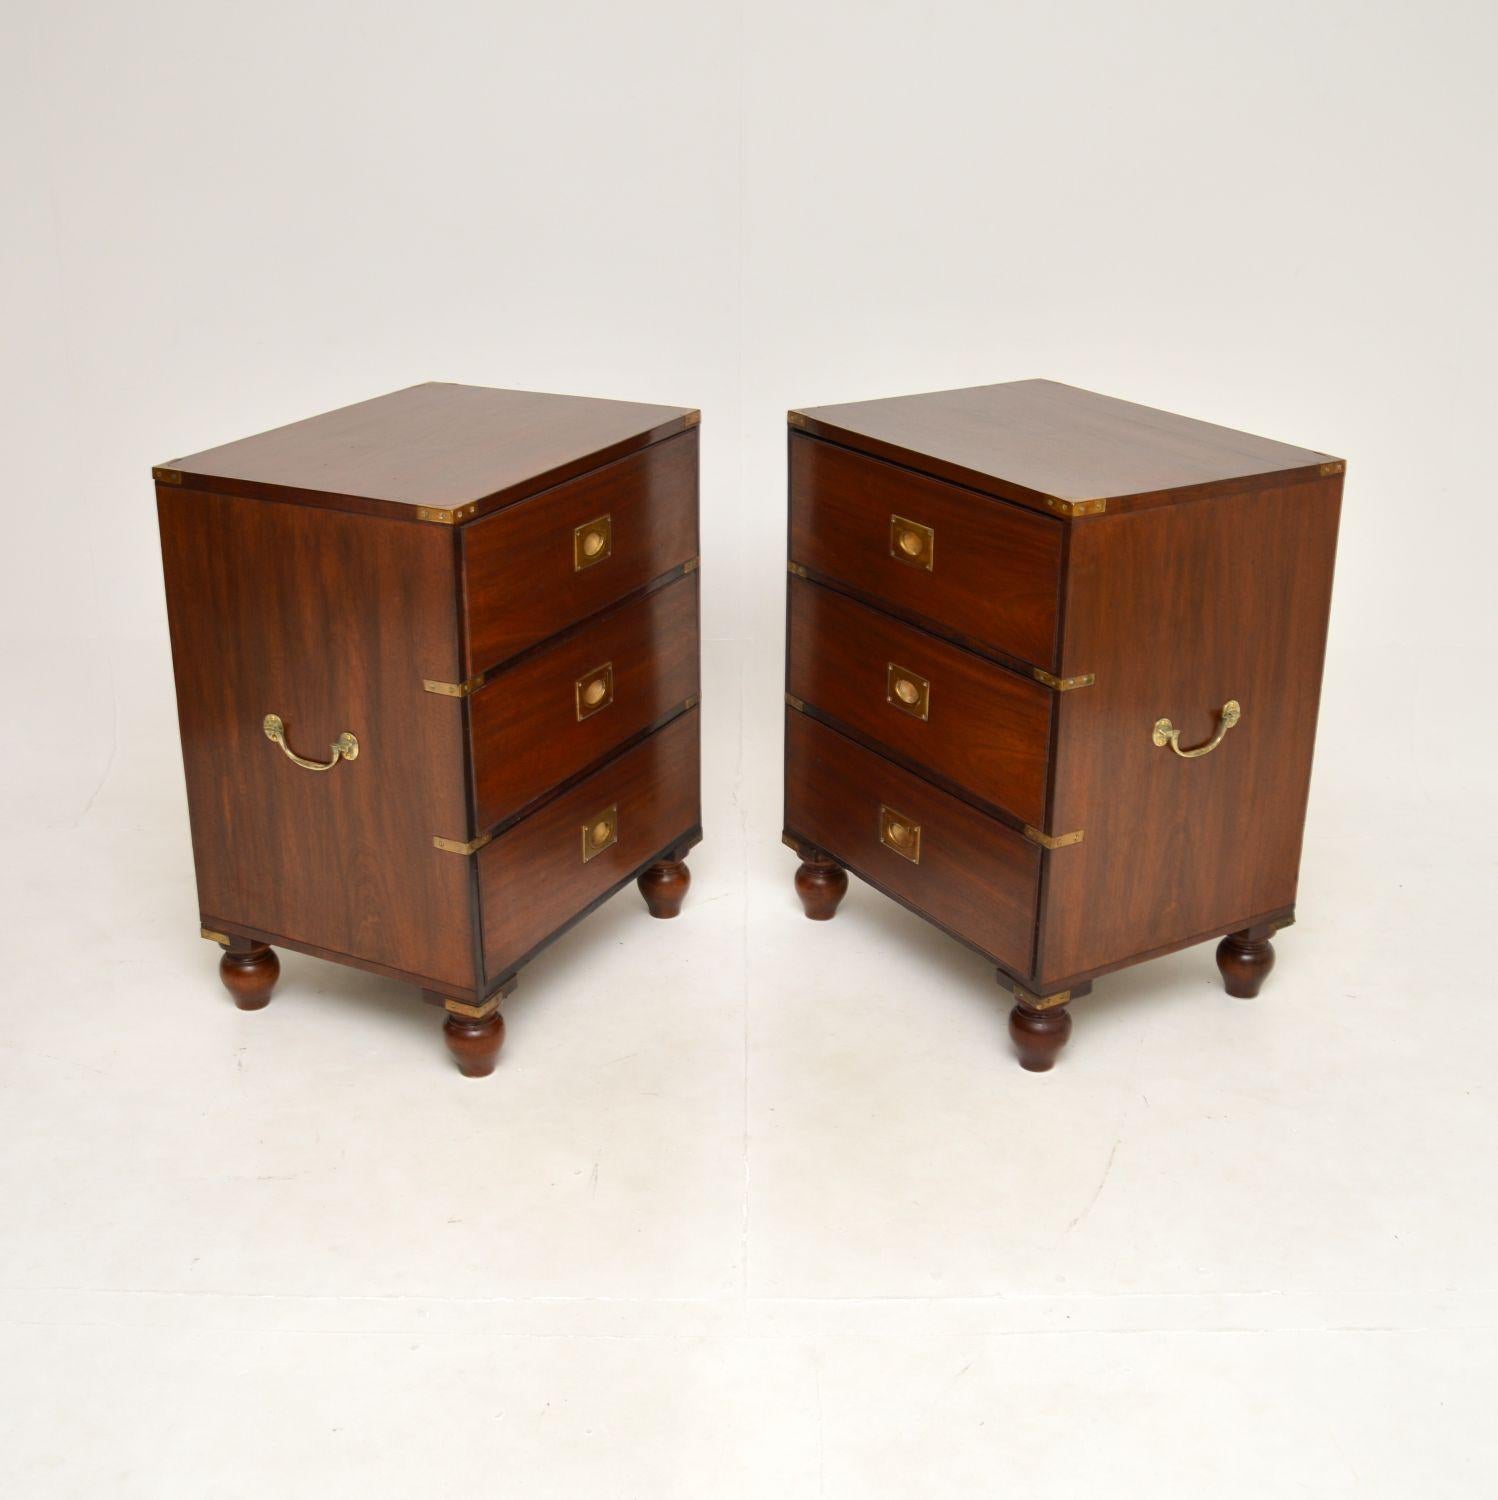 British Pair of Antique Military Campaign Bedside Chests